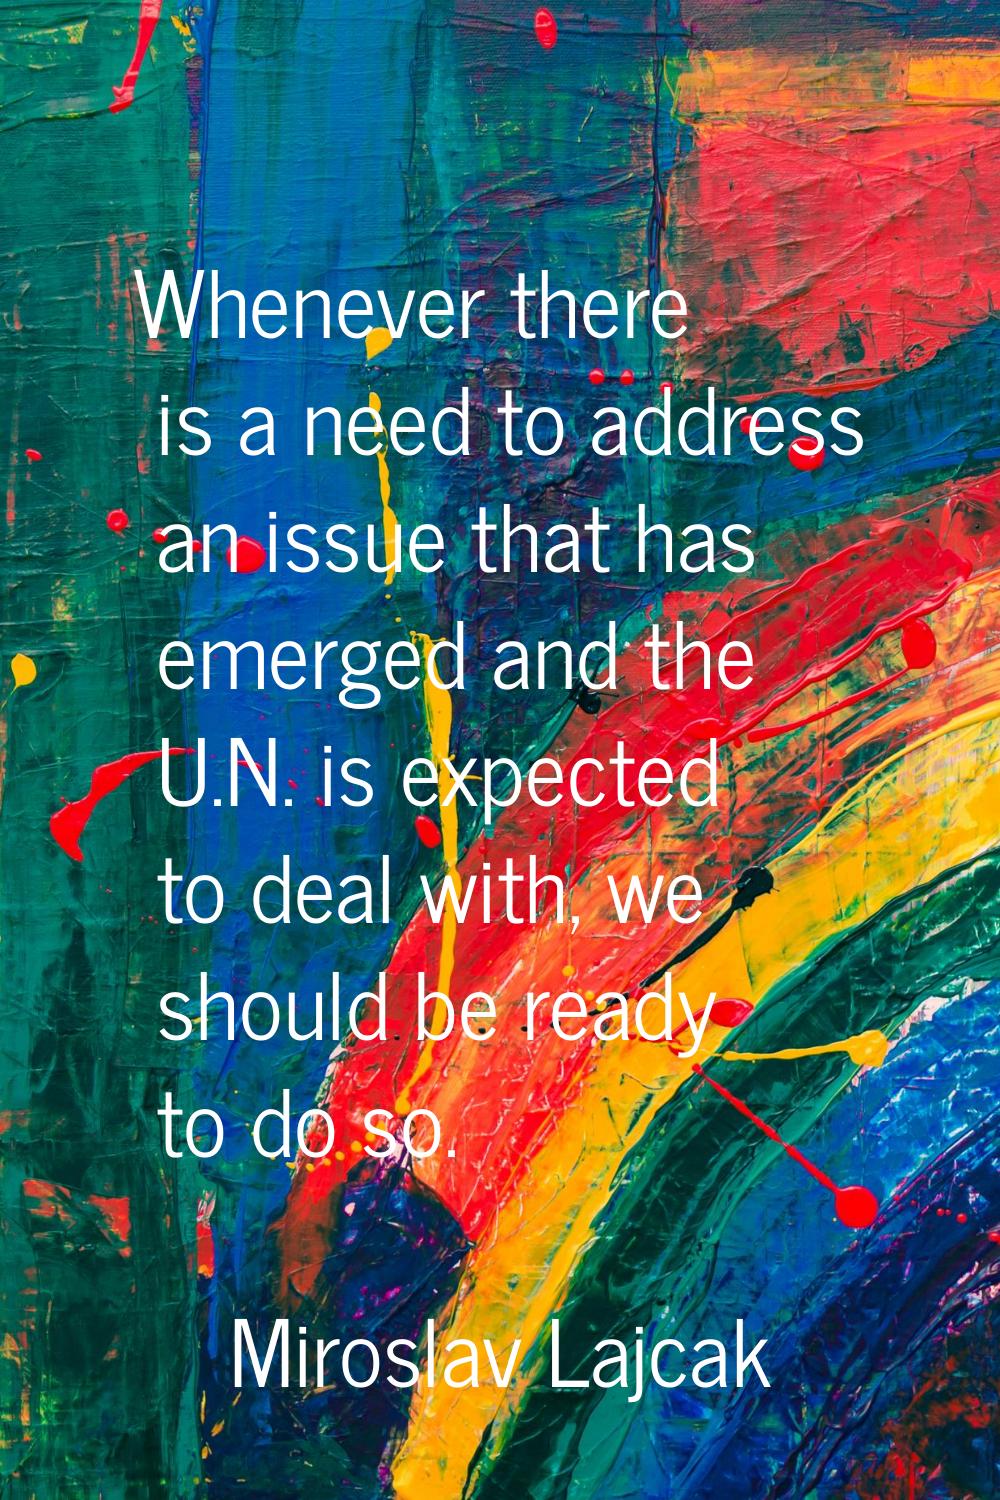 Whenever there is a need to address an issue that has emerged and the U.N. is expected to deal with